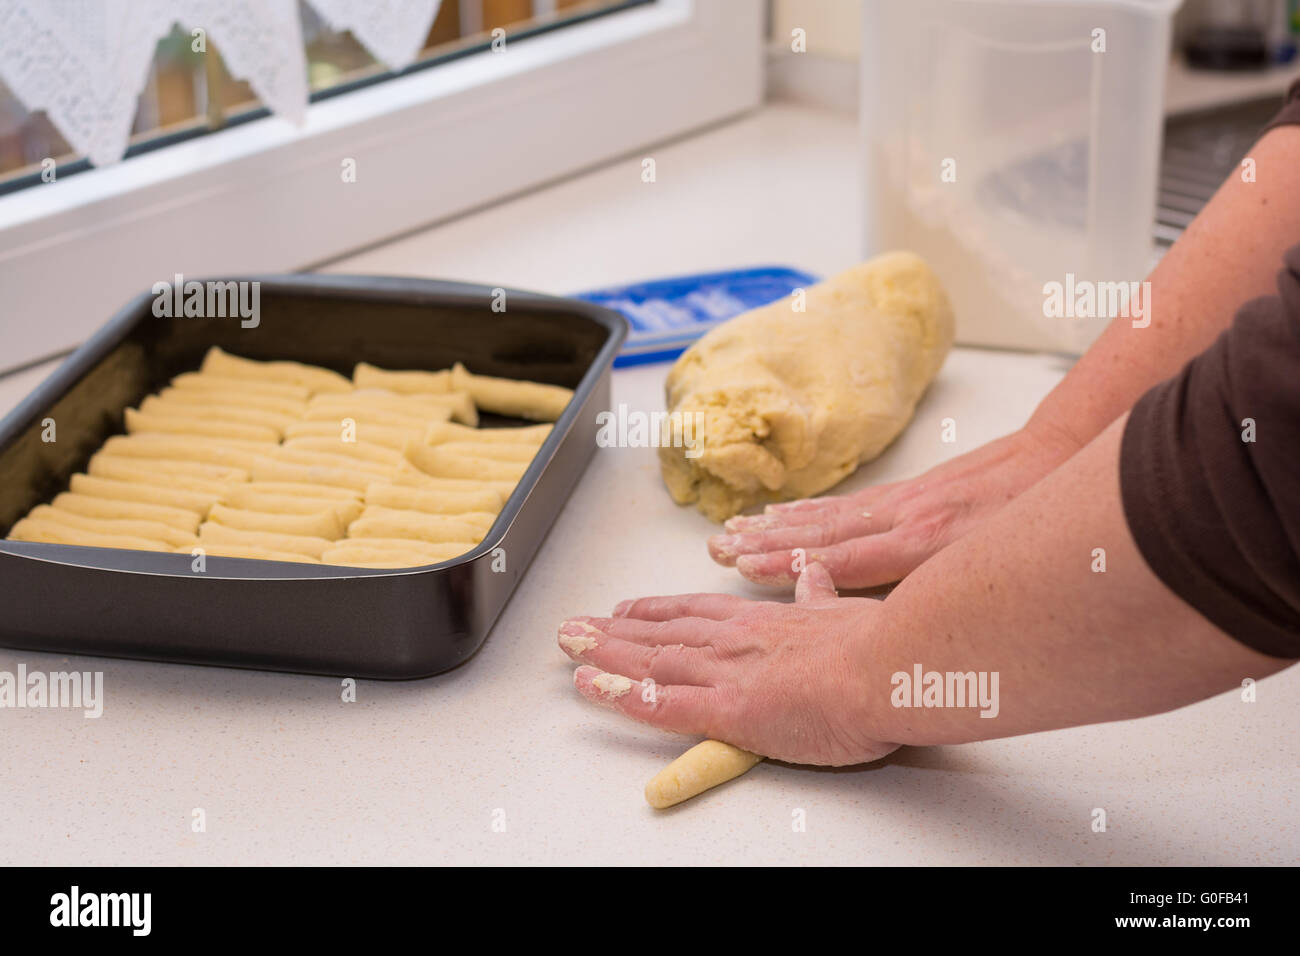 Potato noodles are prepared by hand Stock Photo